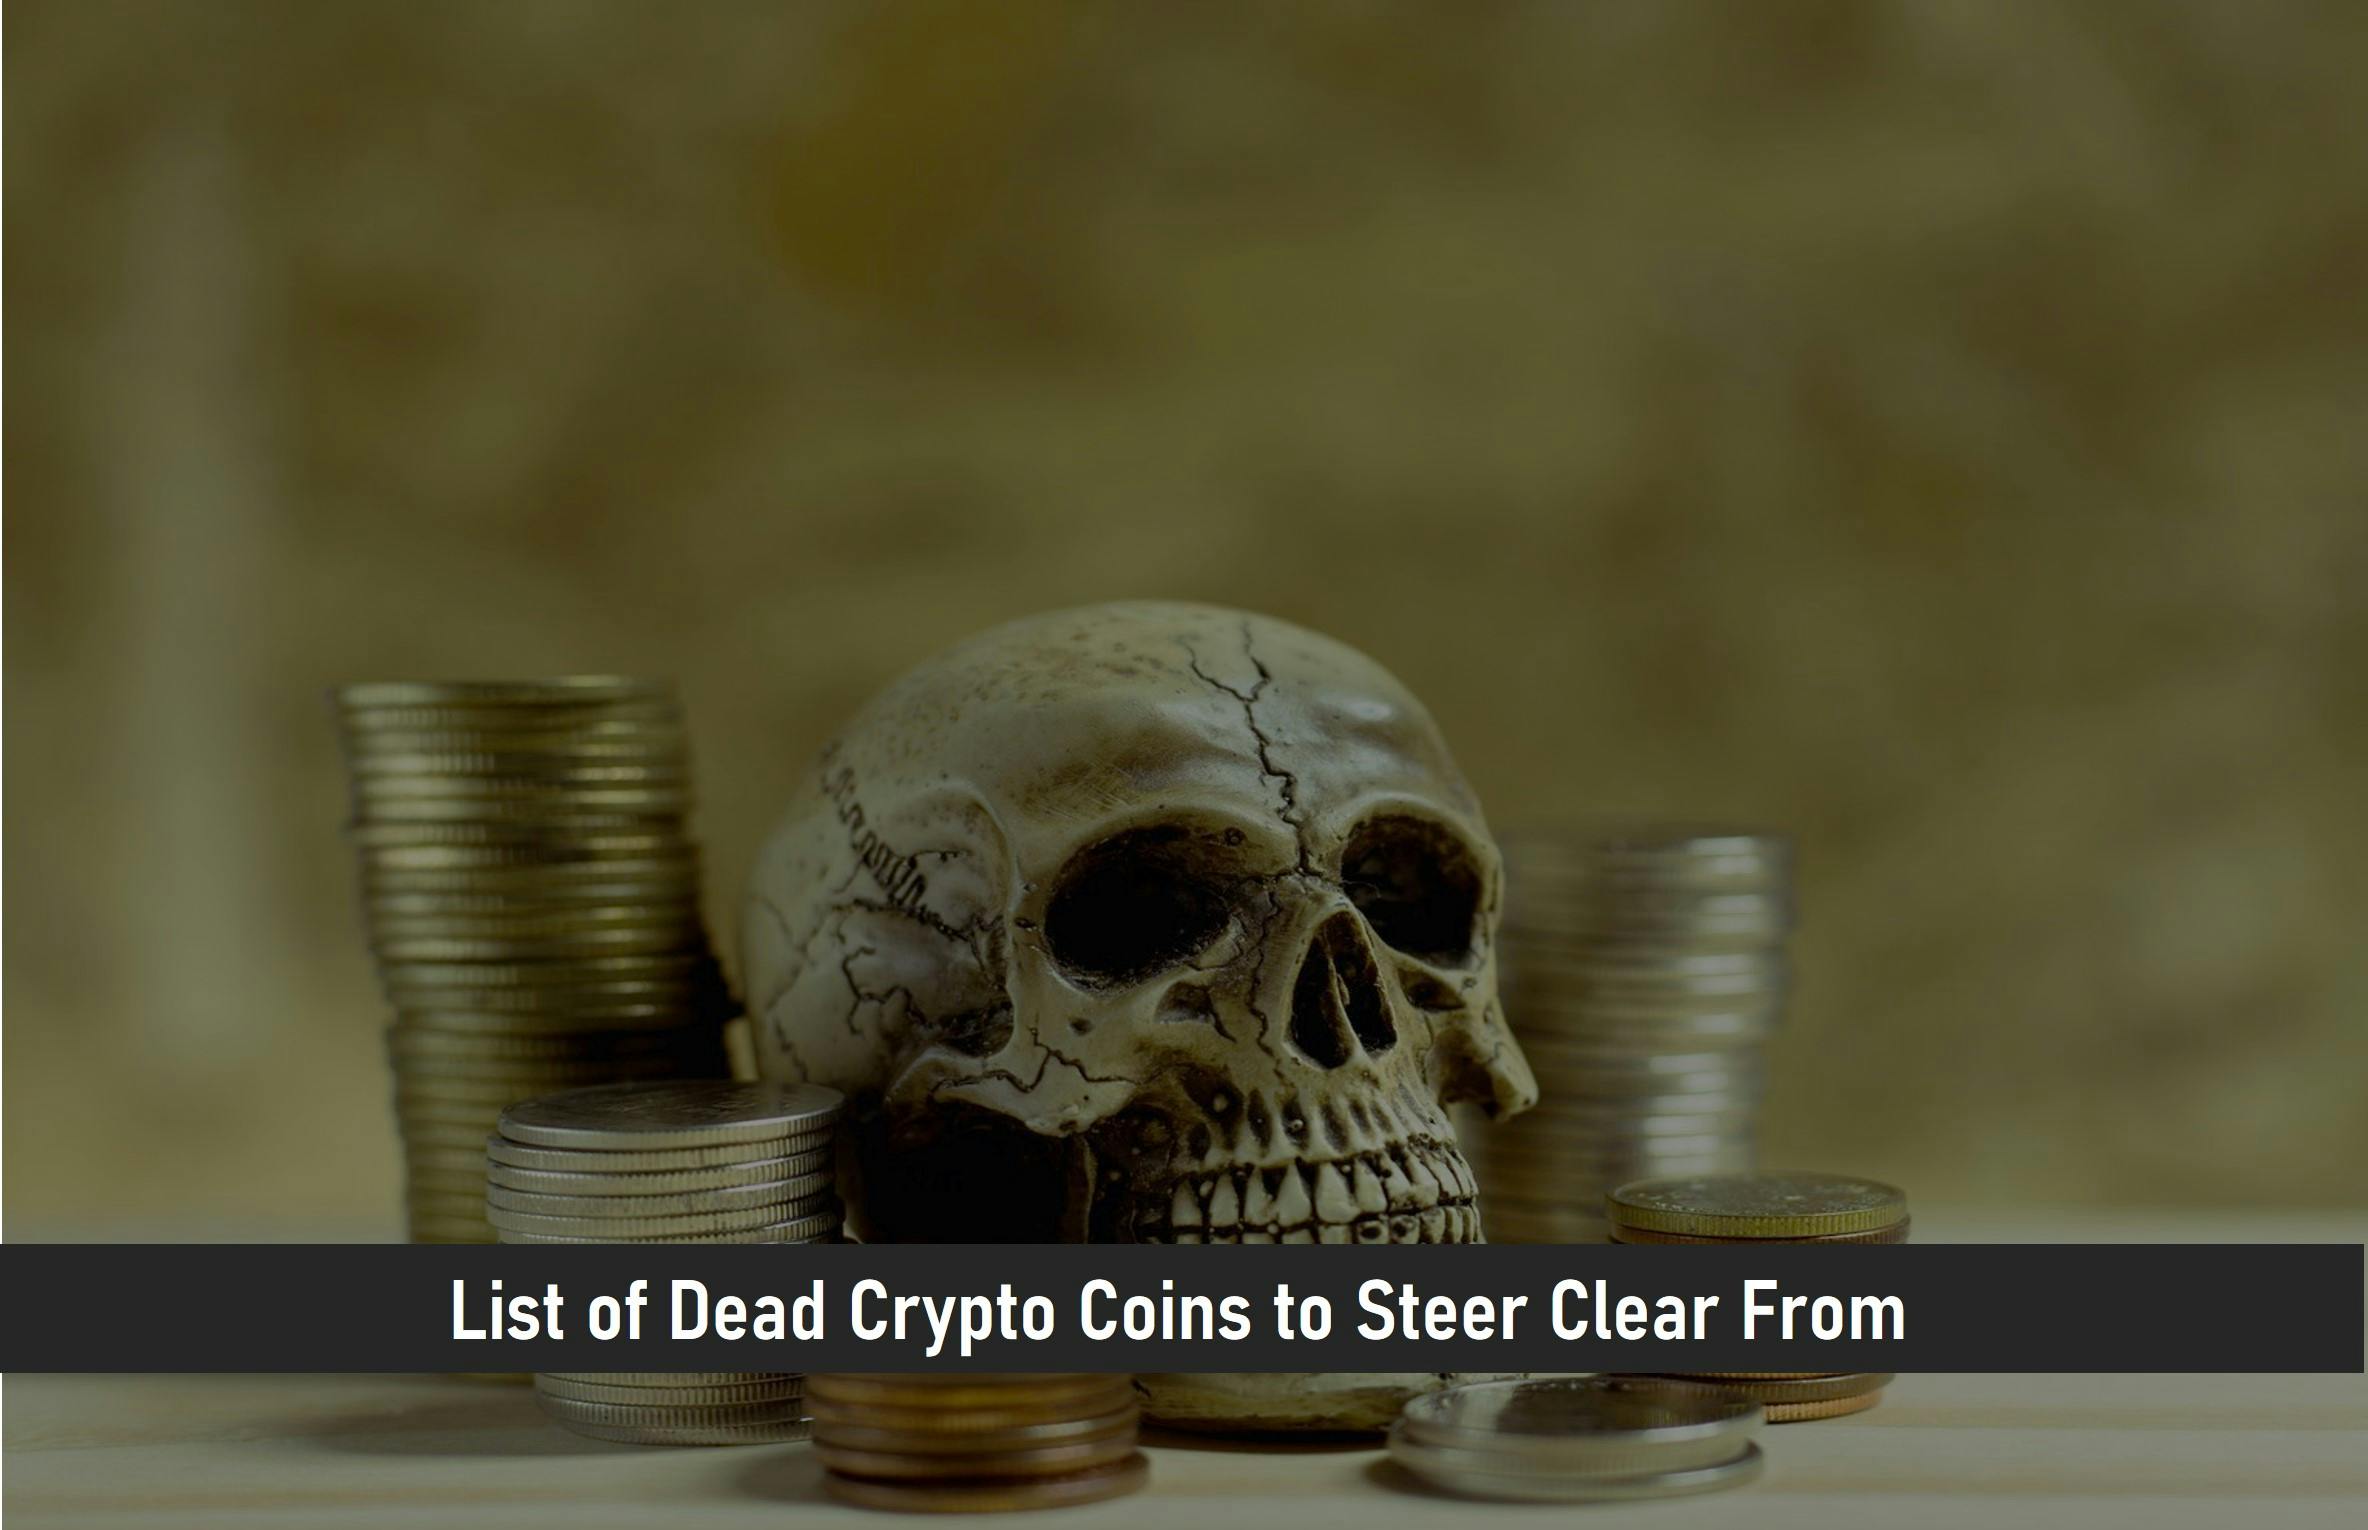 List of Dead Crypto Coins to Steer Clear From